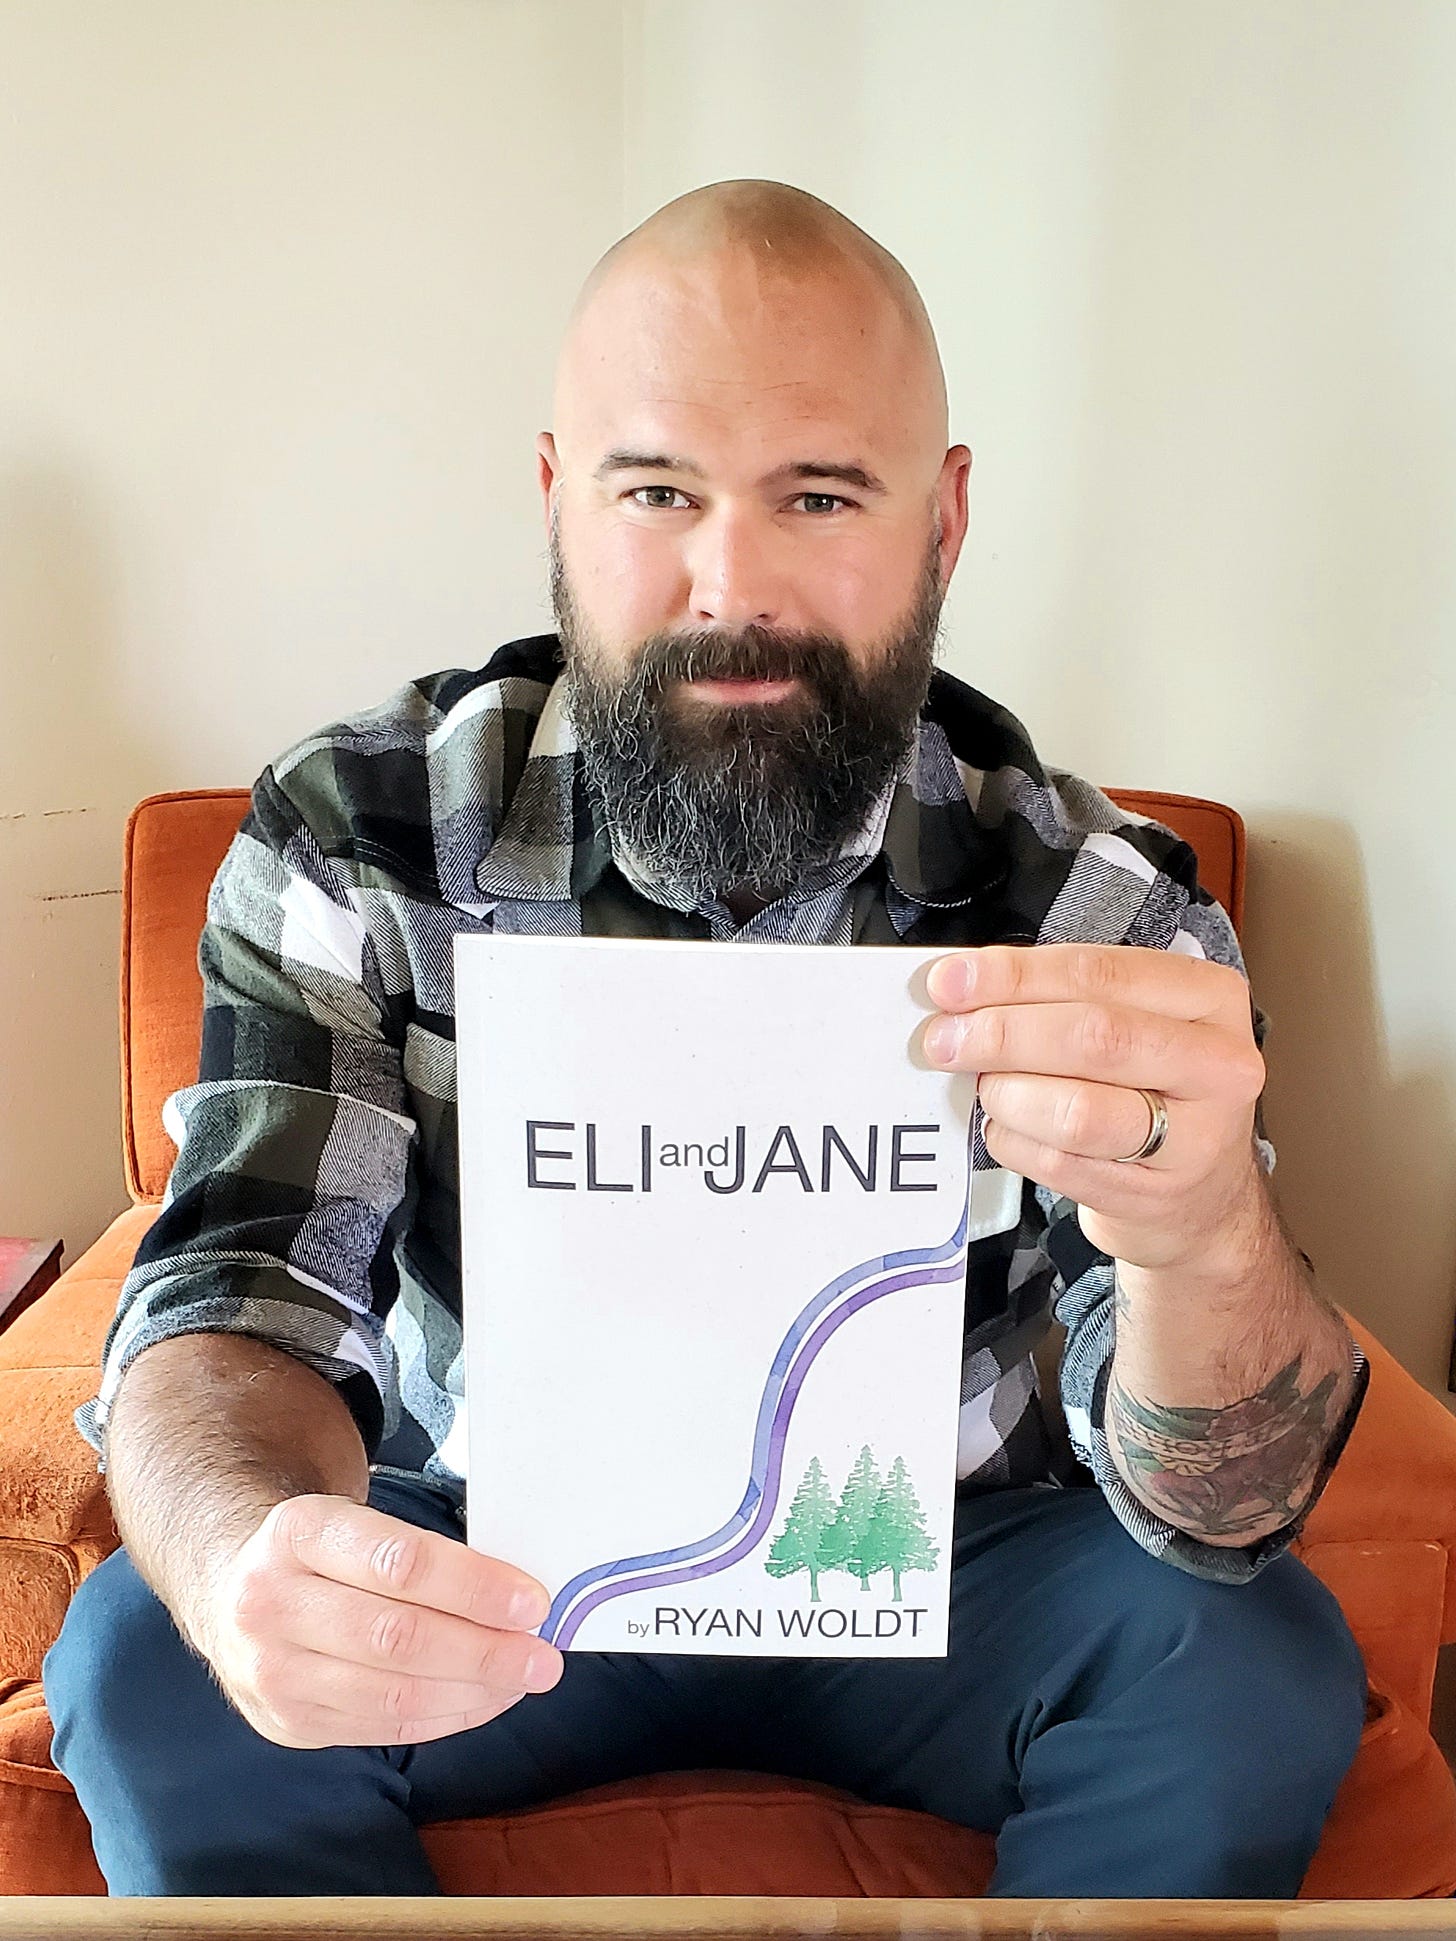 Eli & Jane book held in front of the camera by author Ryan Woldt wearing a black and white flannel shirt sitting on an orange chair. He has a bald head and a black and grey beard.